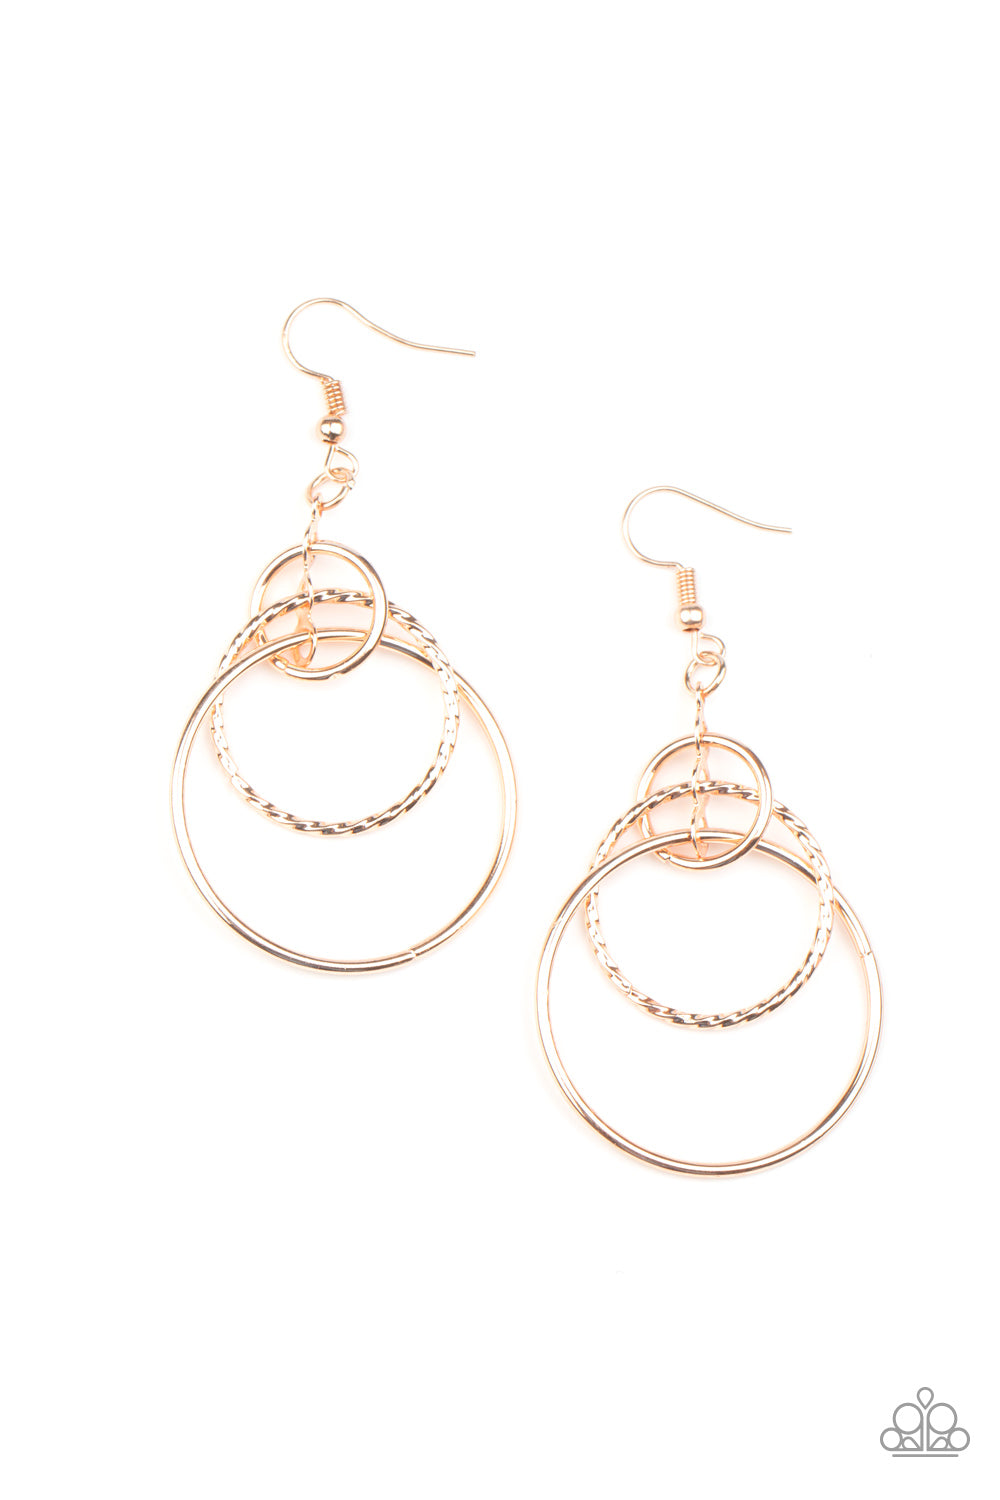 Varying in size and textures, three dainty rose gold hoops are threaded along a shimmery rose gold fitting, creating a dizzying lure. Earring attaches to a standard fishhook fitting.